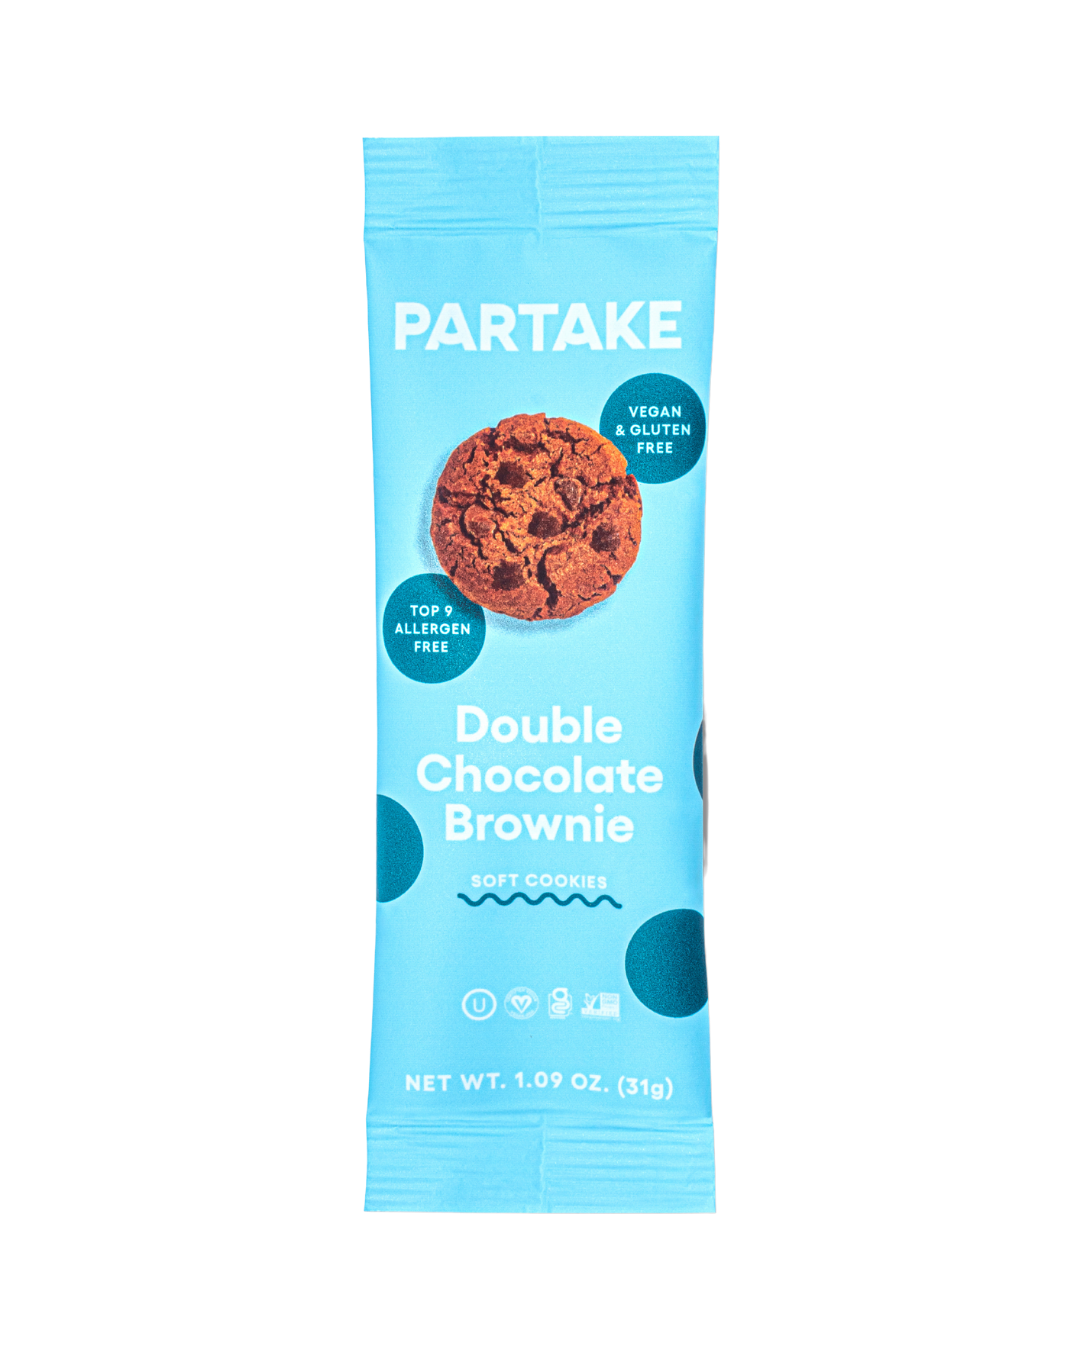 Snack Pack - Soft Baked Double Chocolate Brownie